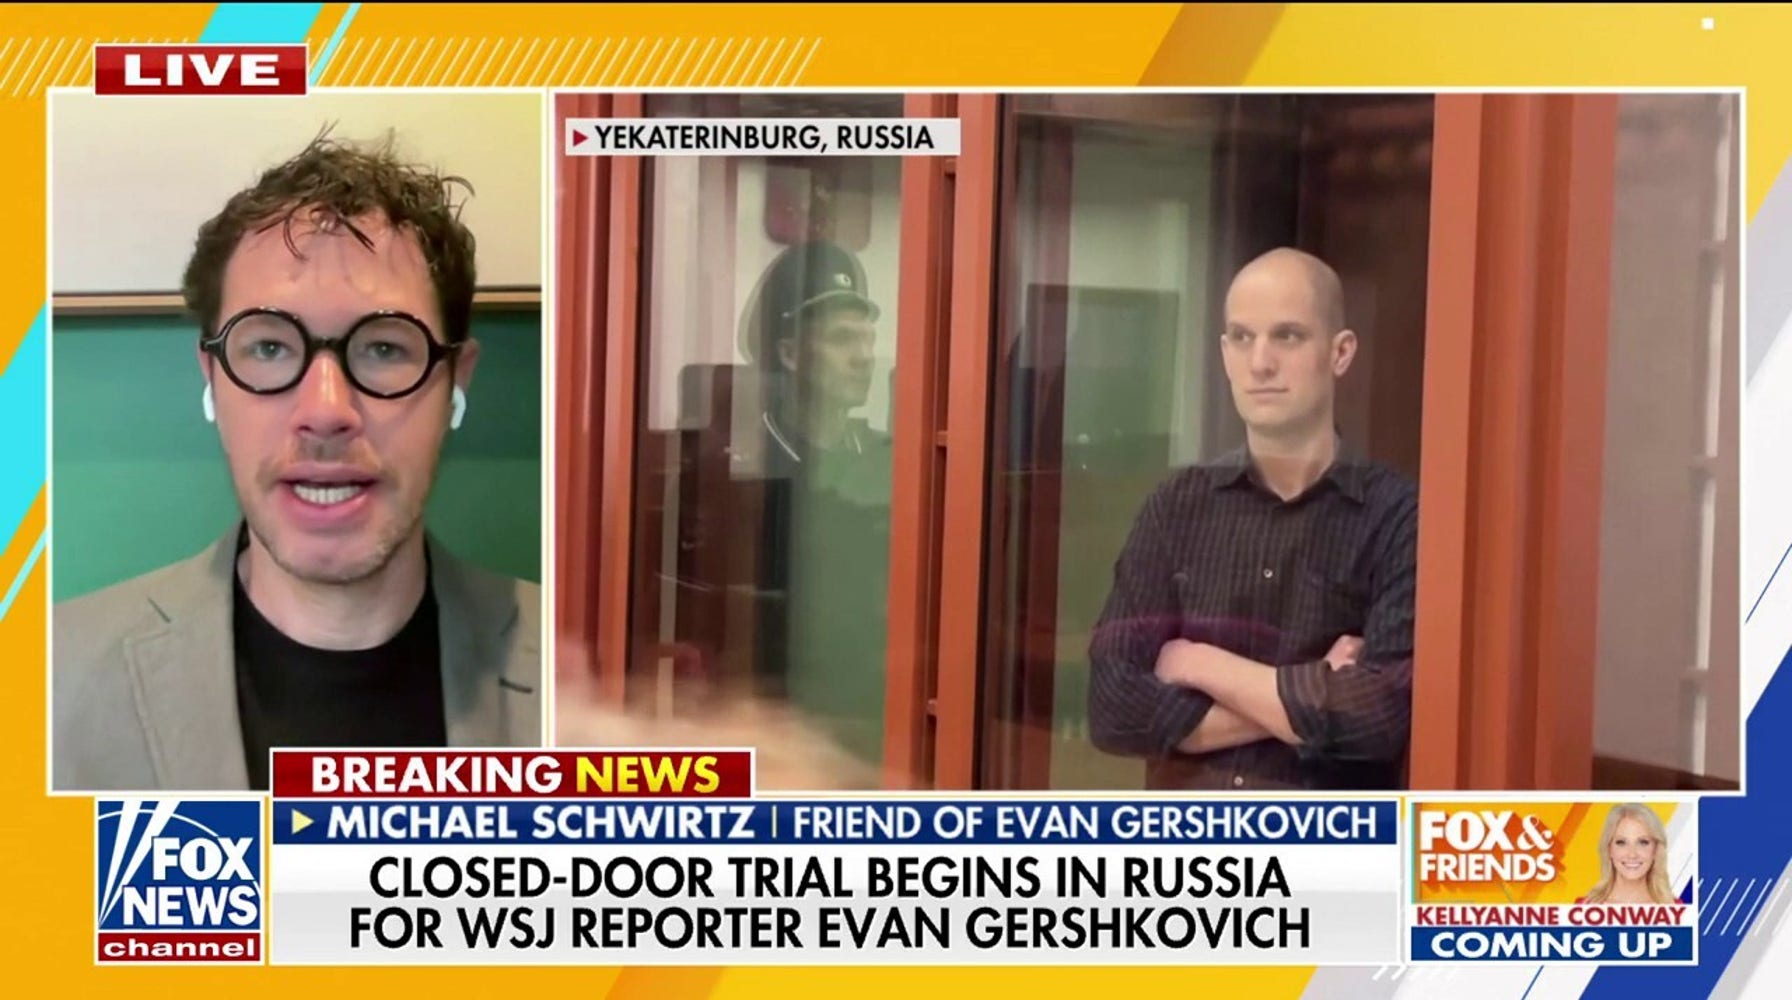 Beloved Wall Street Journal Reporter Evan Gershkovich's Trial for Espionage Charges Begins in Russia